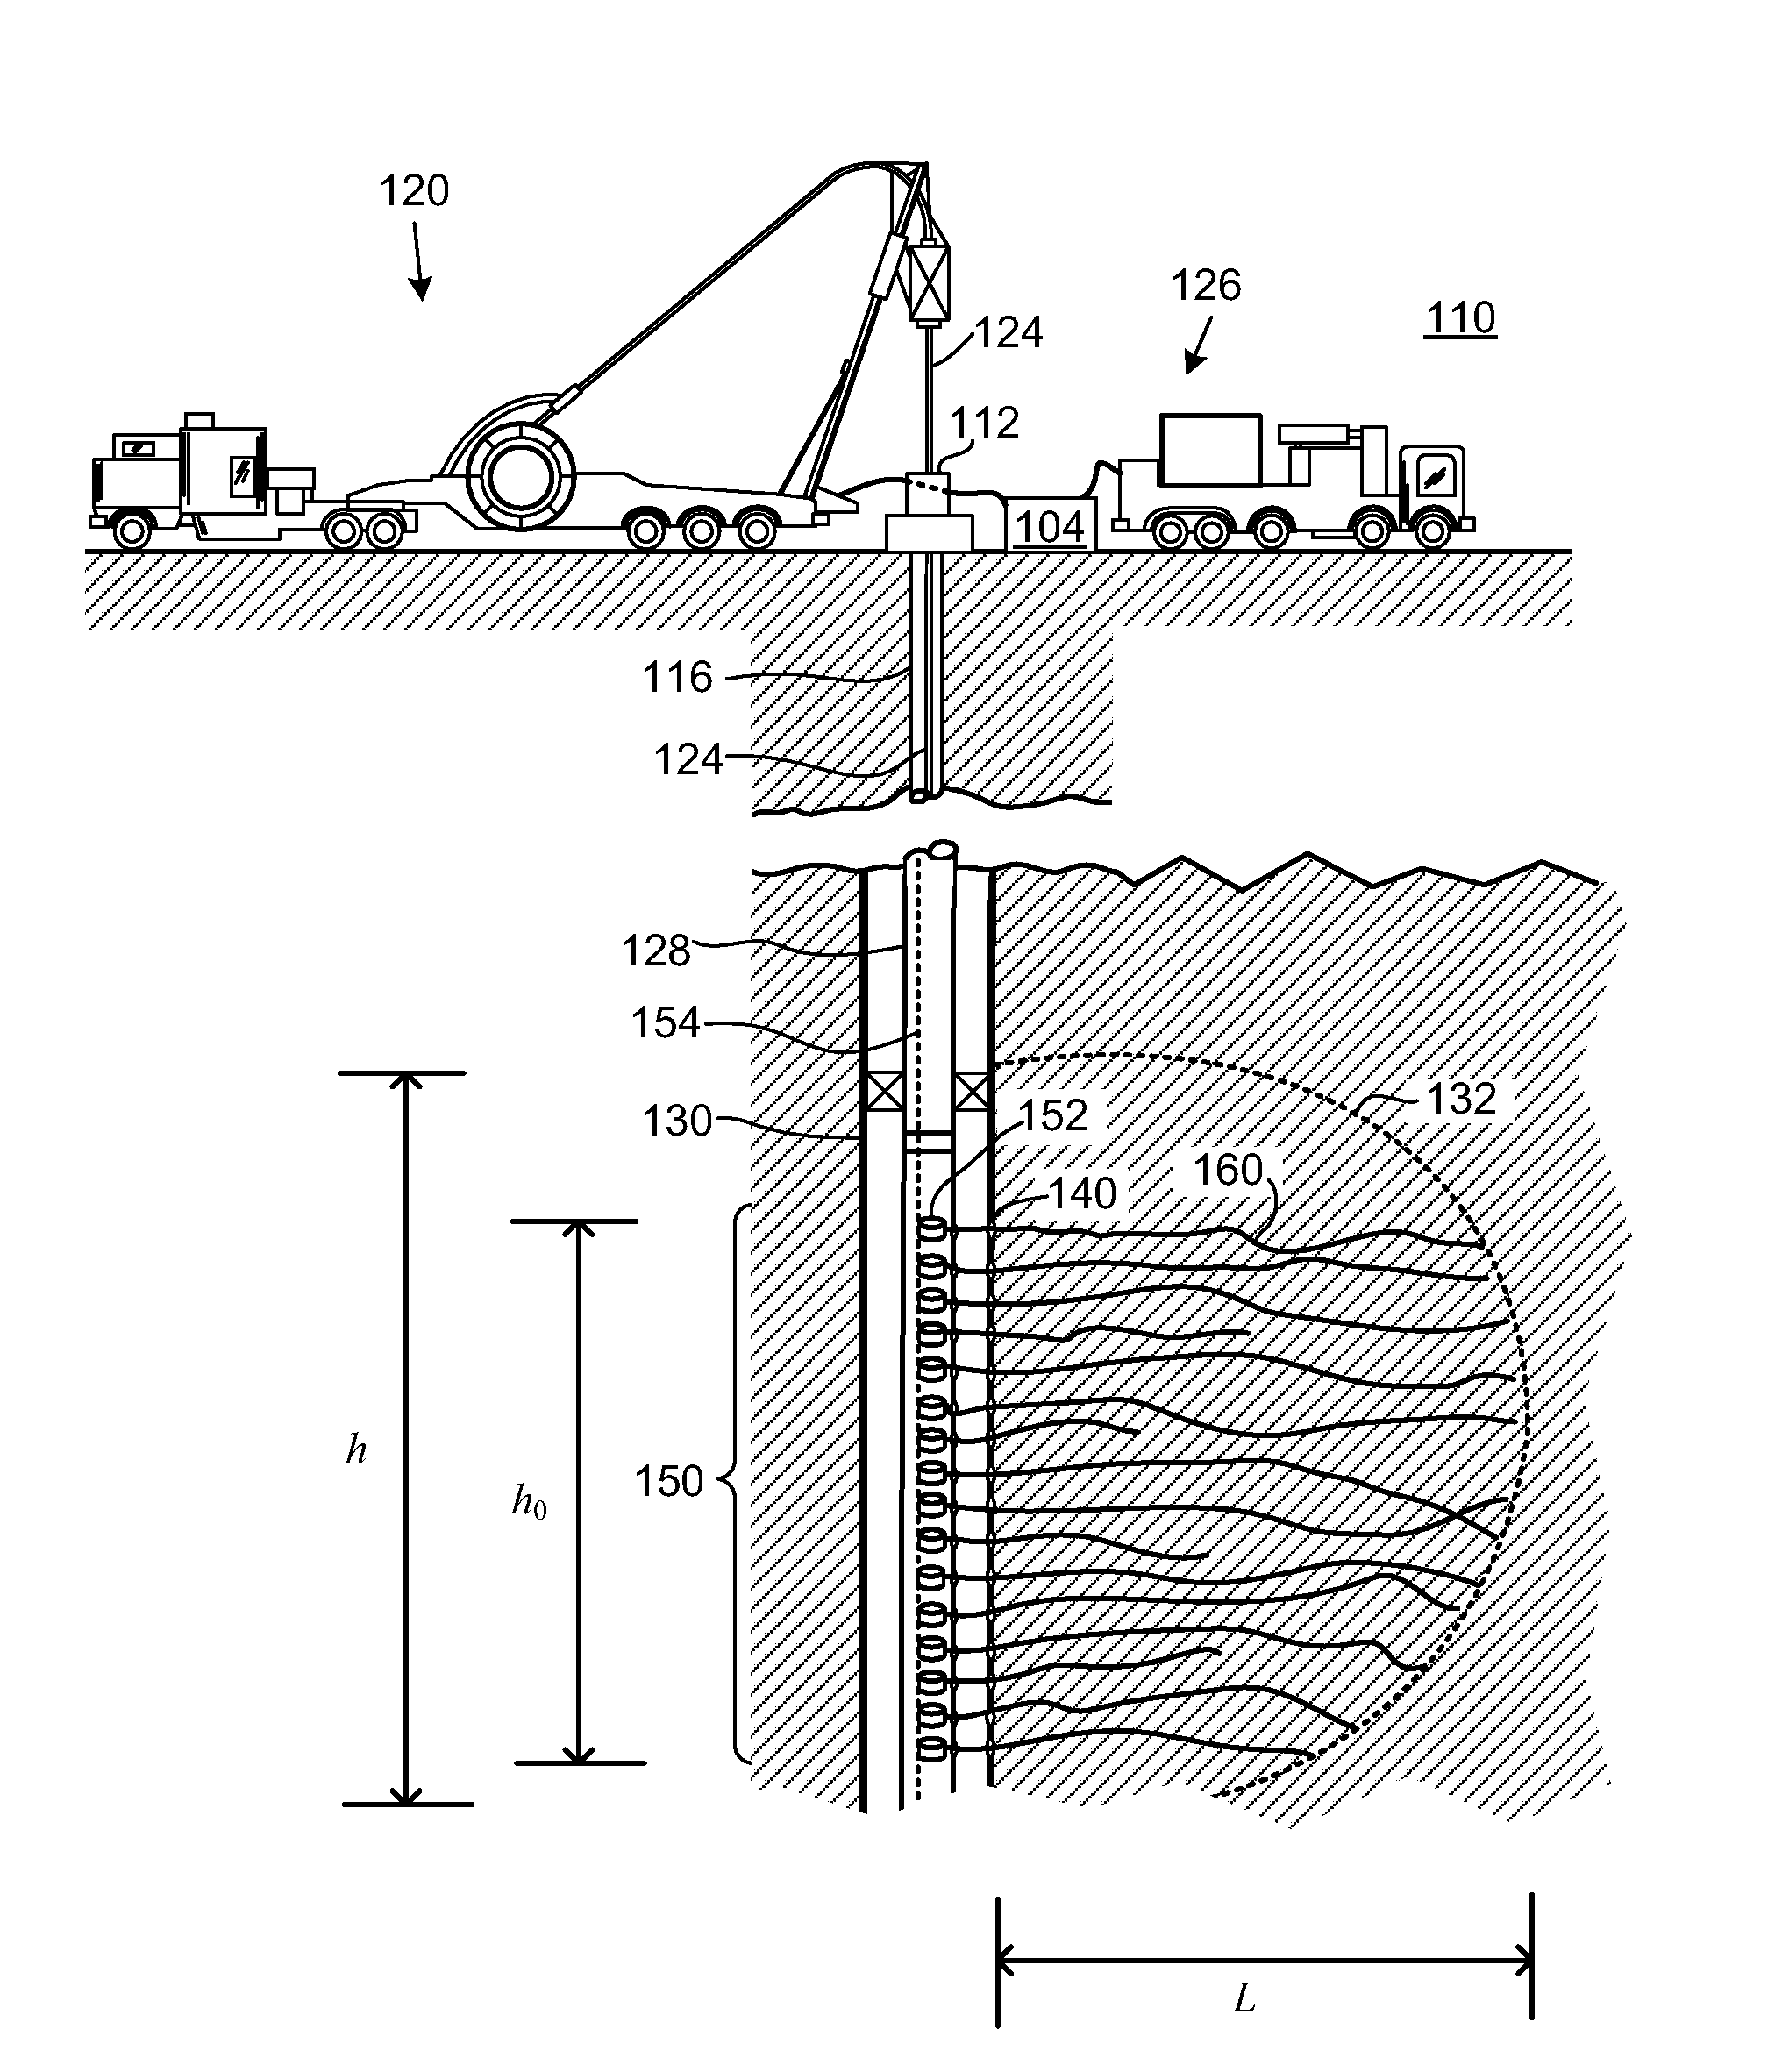 Continuous fibers for use in hydraulic fracturing applications